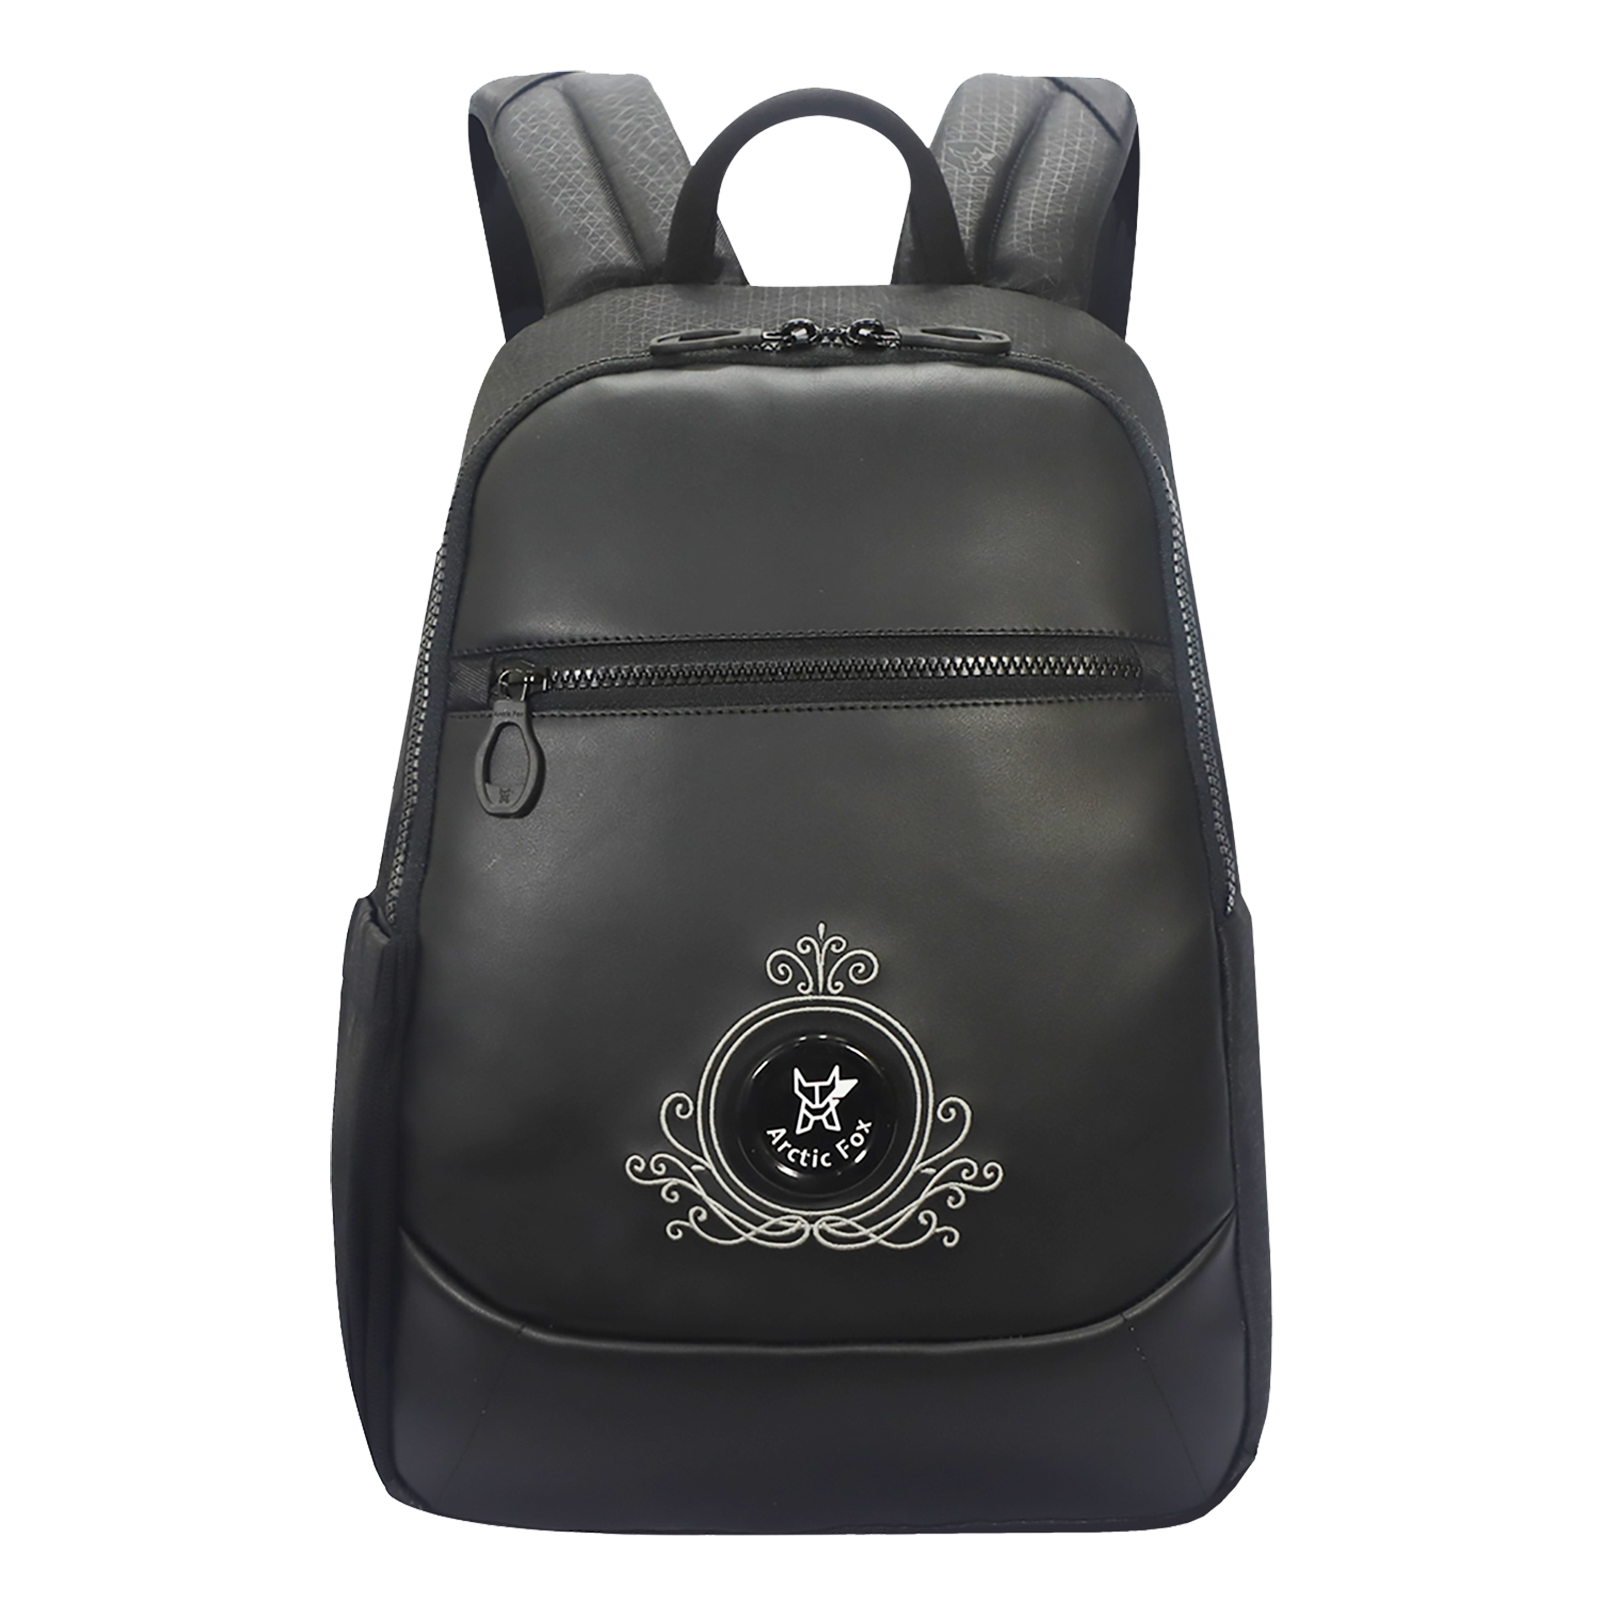 Arctic Fox Royal 13 Litres PU Coated Polyester Backpack (3 Spacious Compartments, FUNBPKBLKWZ097013, Black)